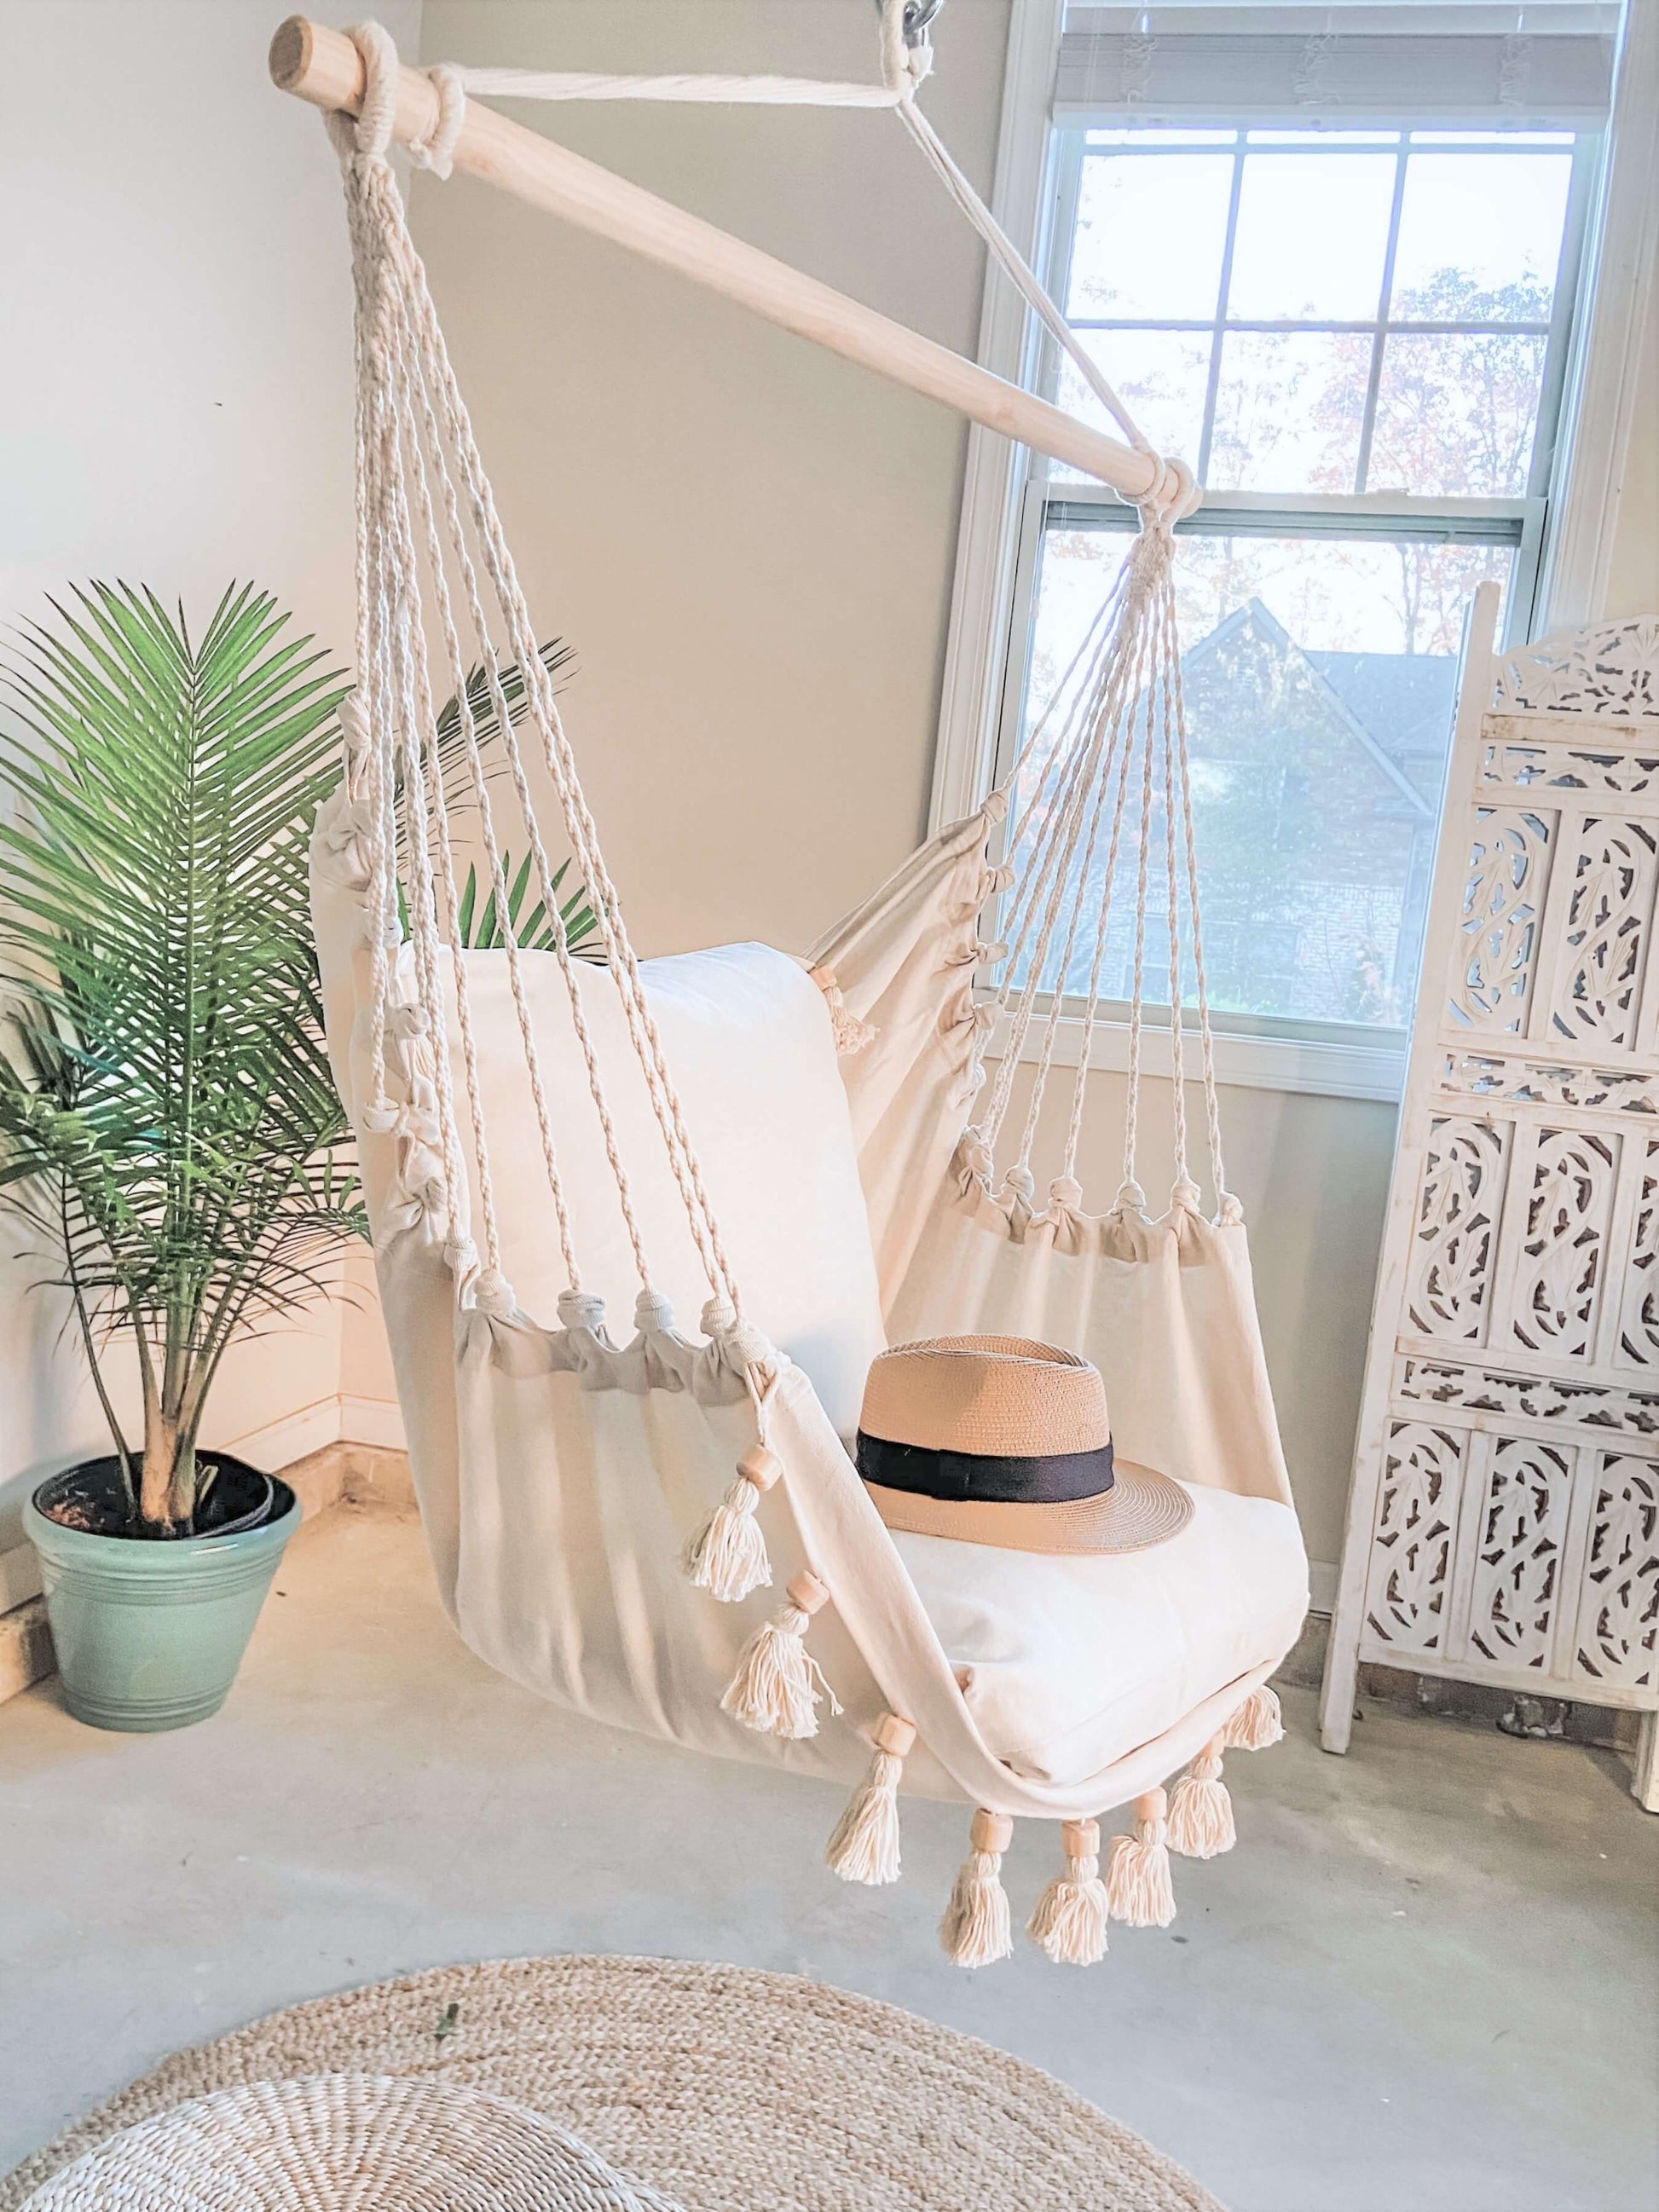 Boho Hammock Chair With Tassels and planter by the window